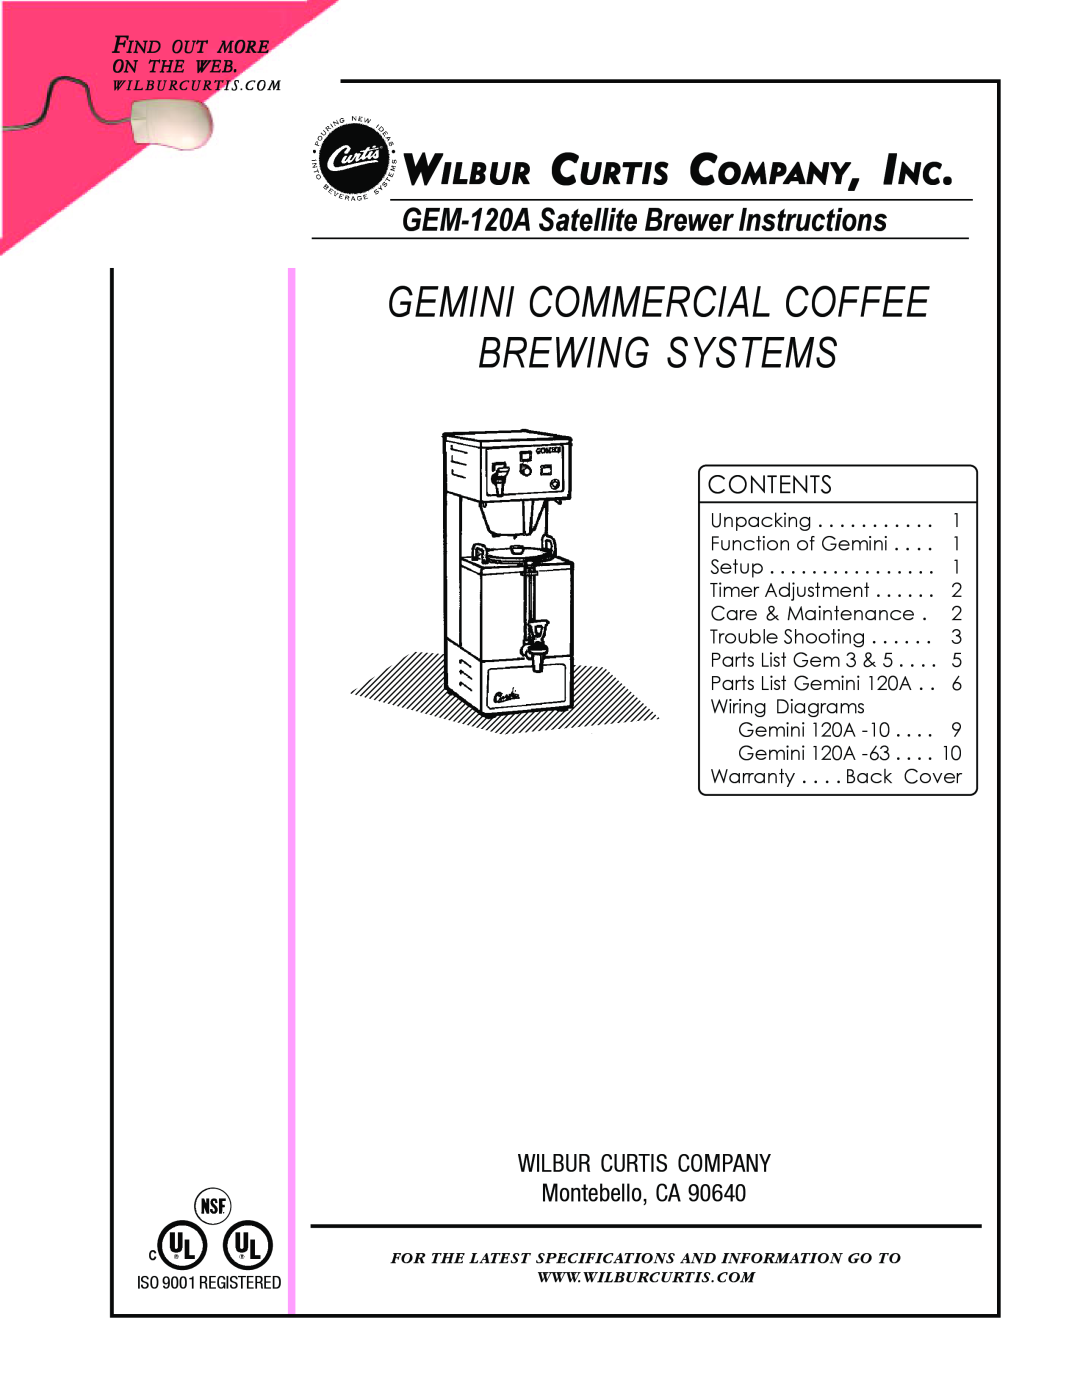 Wibur Curtis Company CA 90640 warranty Gemini Commercial Coffee, Brewing Systems, GEM-120ASatellite Brewer Instructions 